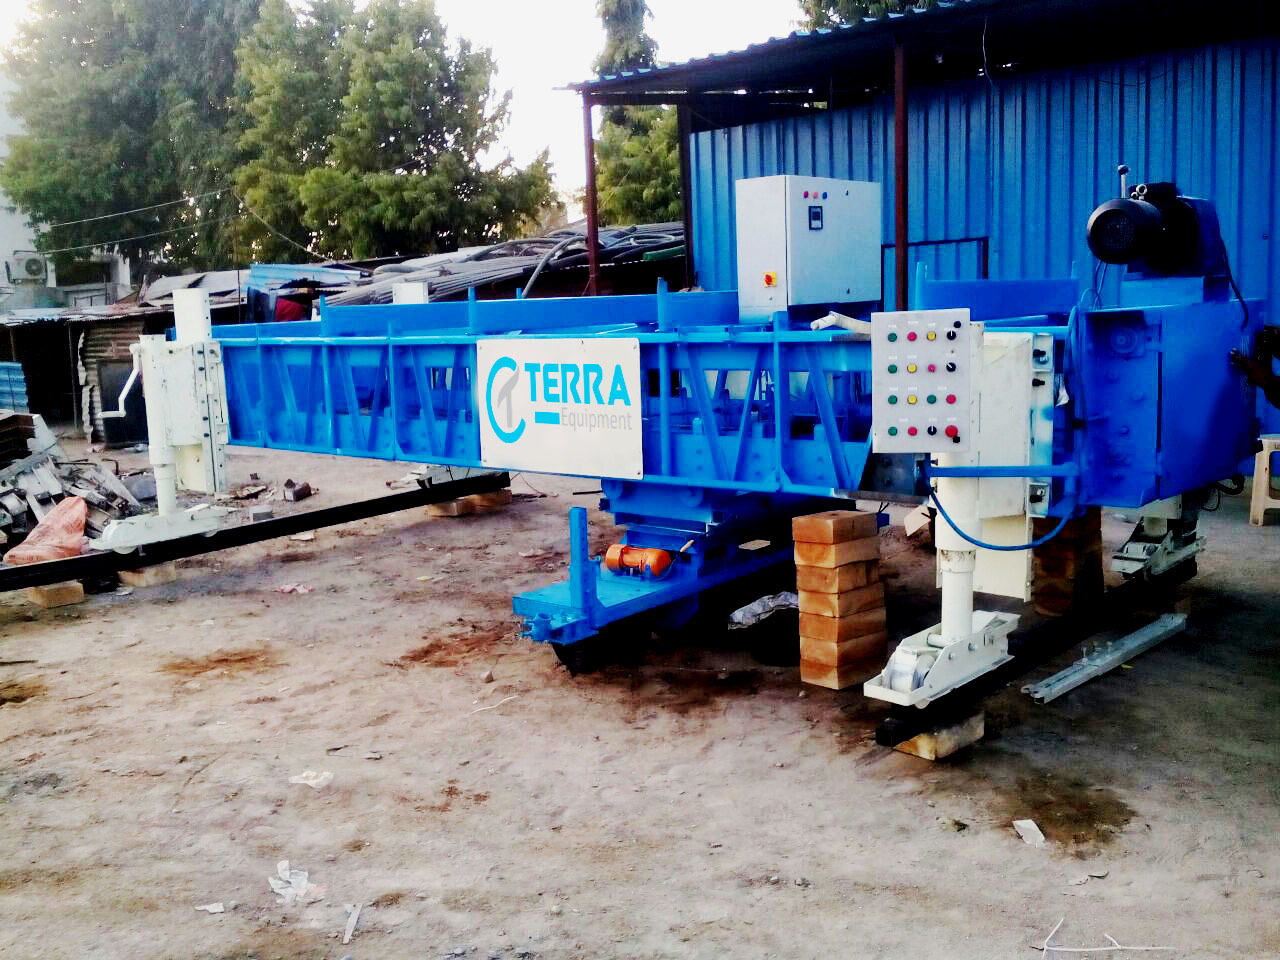 Concrete Canal Paver Finisher